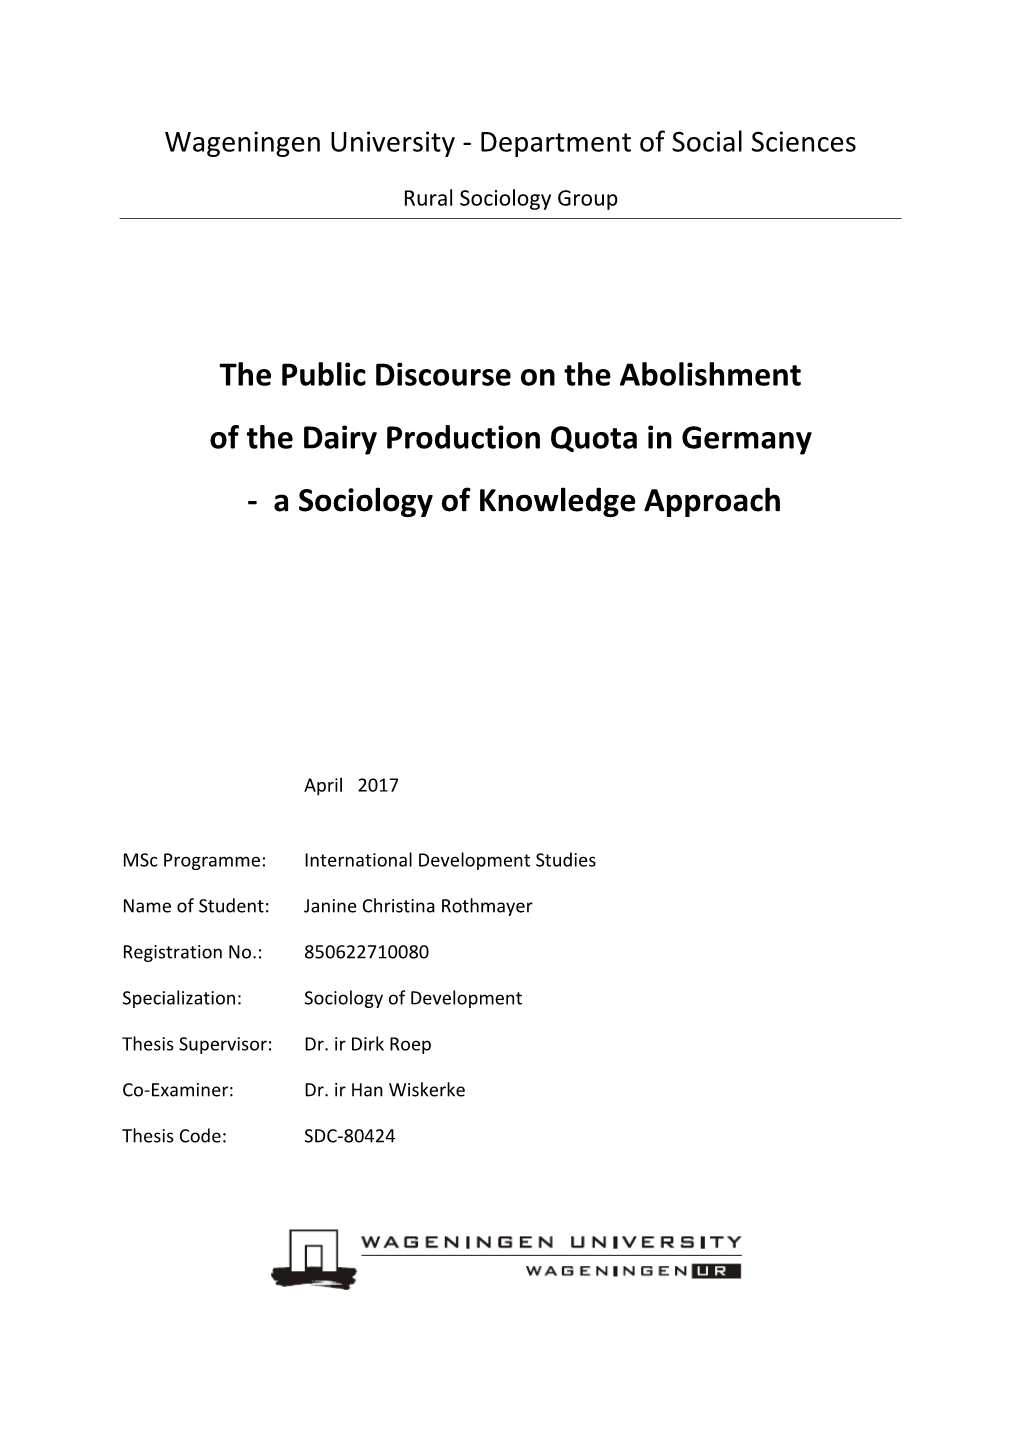 The Public Discourse on the Abolishment of the Dairy Production Quota in Germany - a Sociology of Knowledge Approach